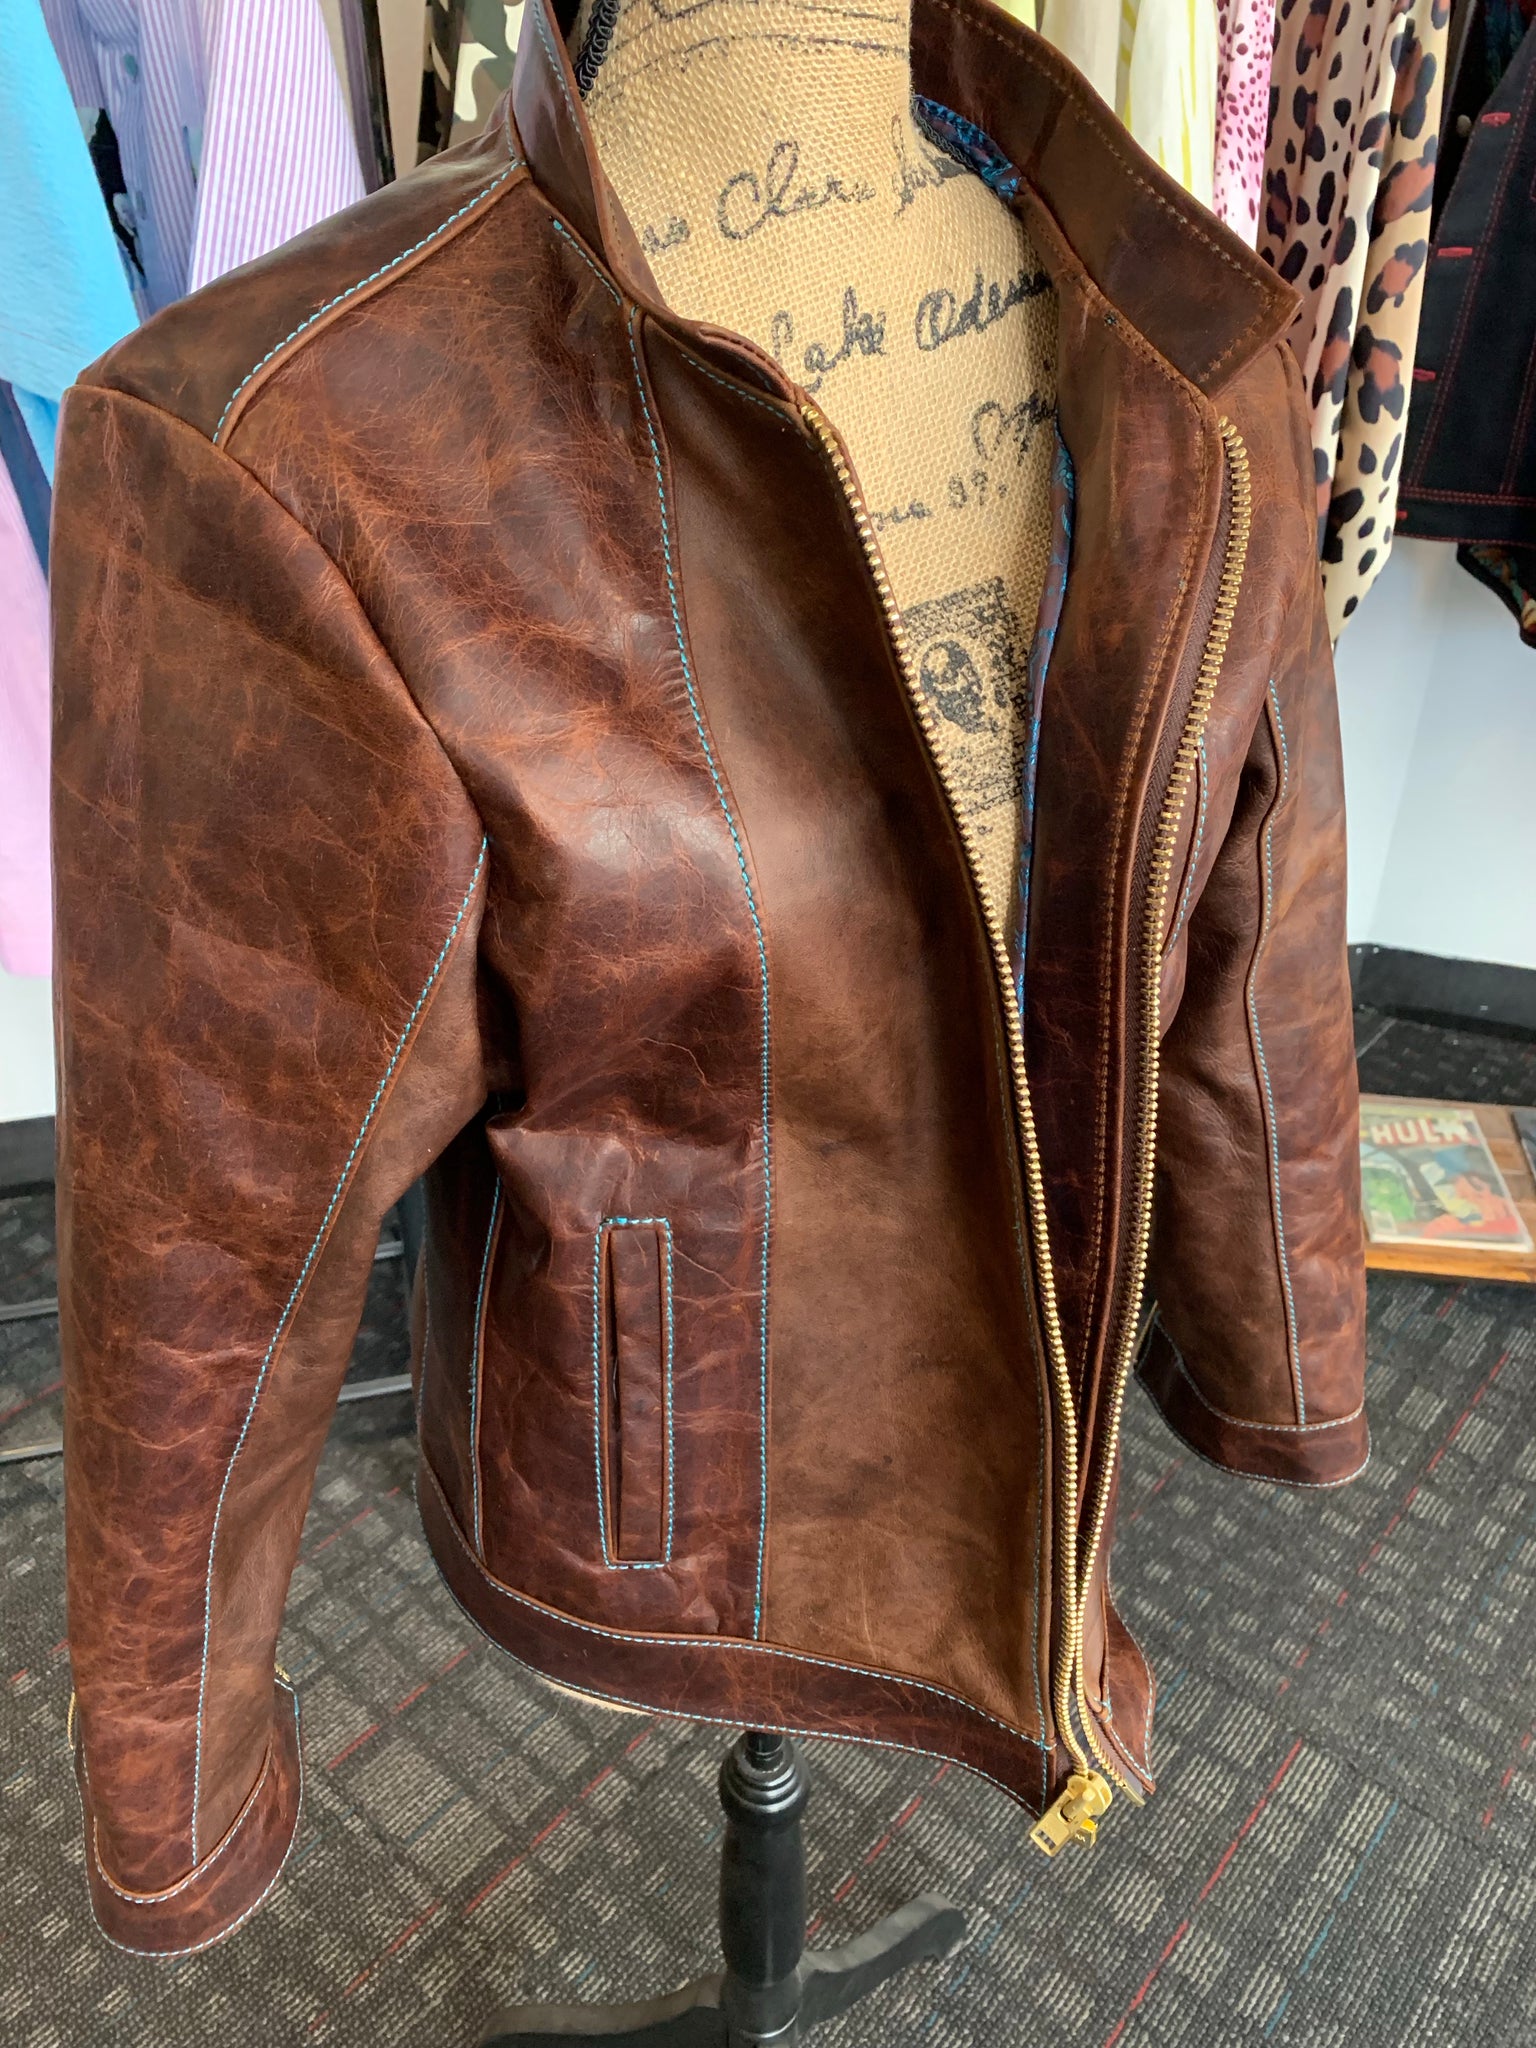 Women’s easy rider leather jacket